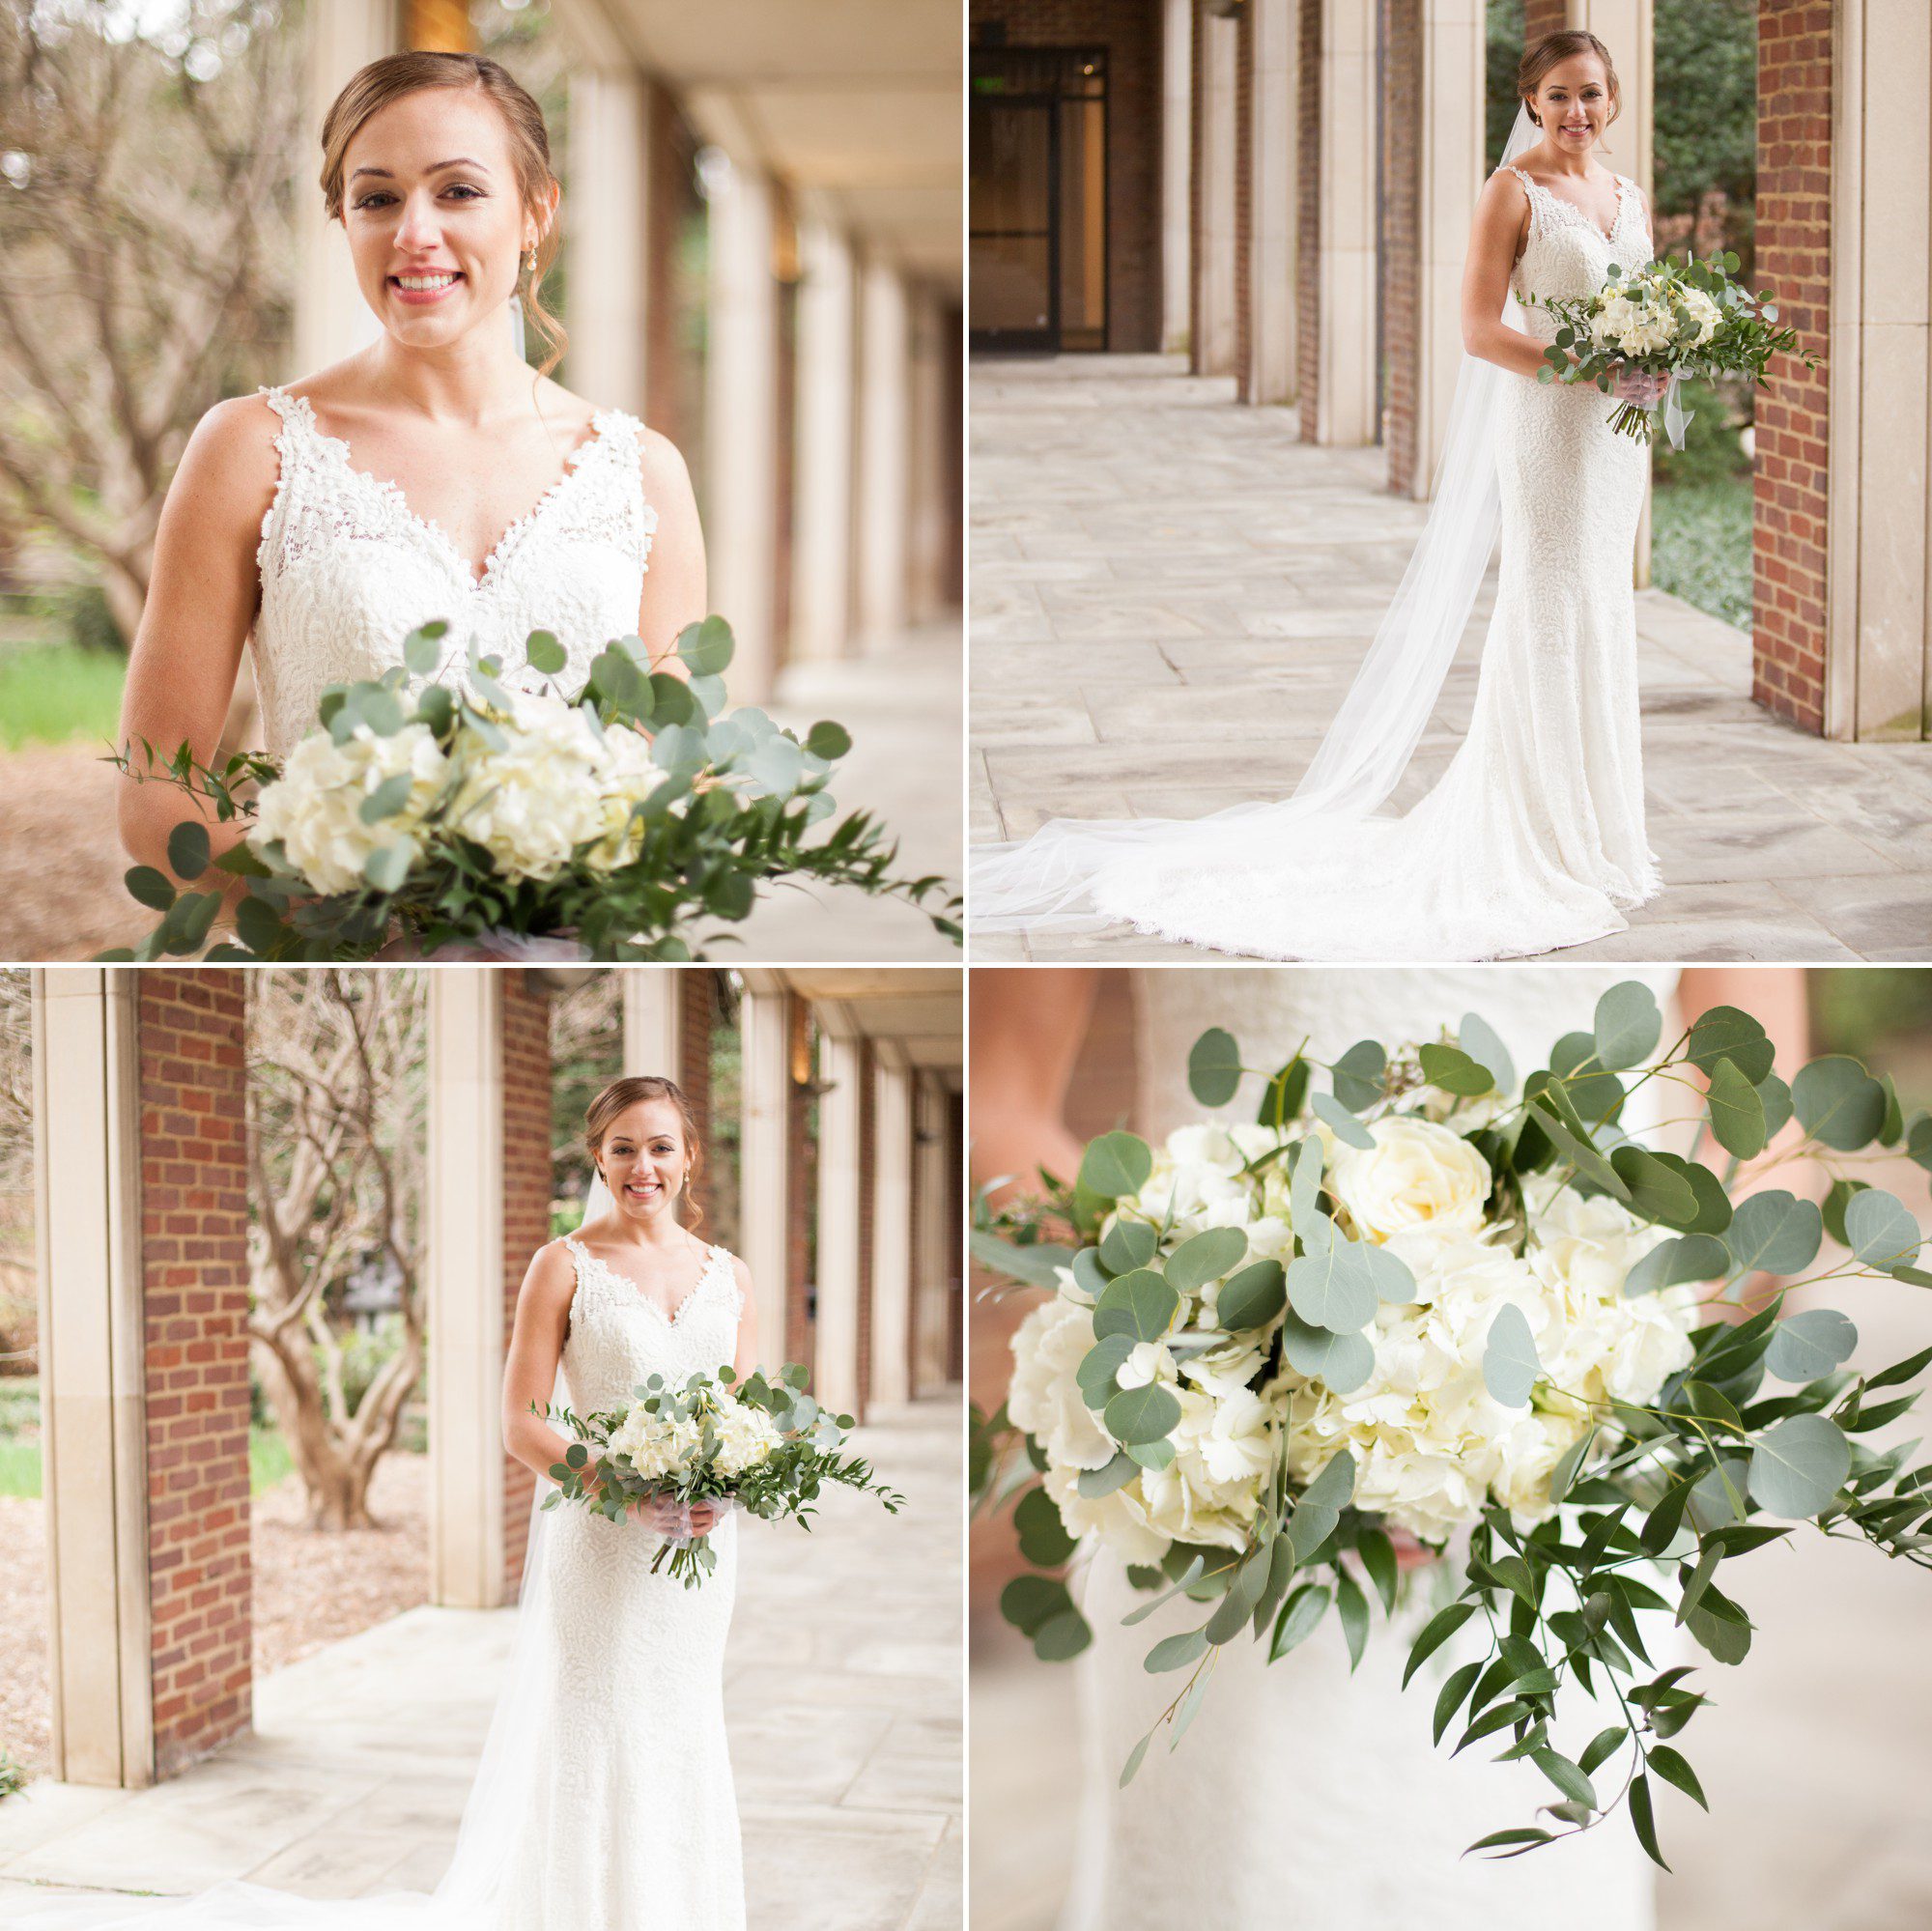 Bride in courtyard before the wedding ceremony at Benton Chapel in Nashville TN. Wedding photography by Krista Lee.